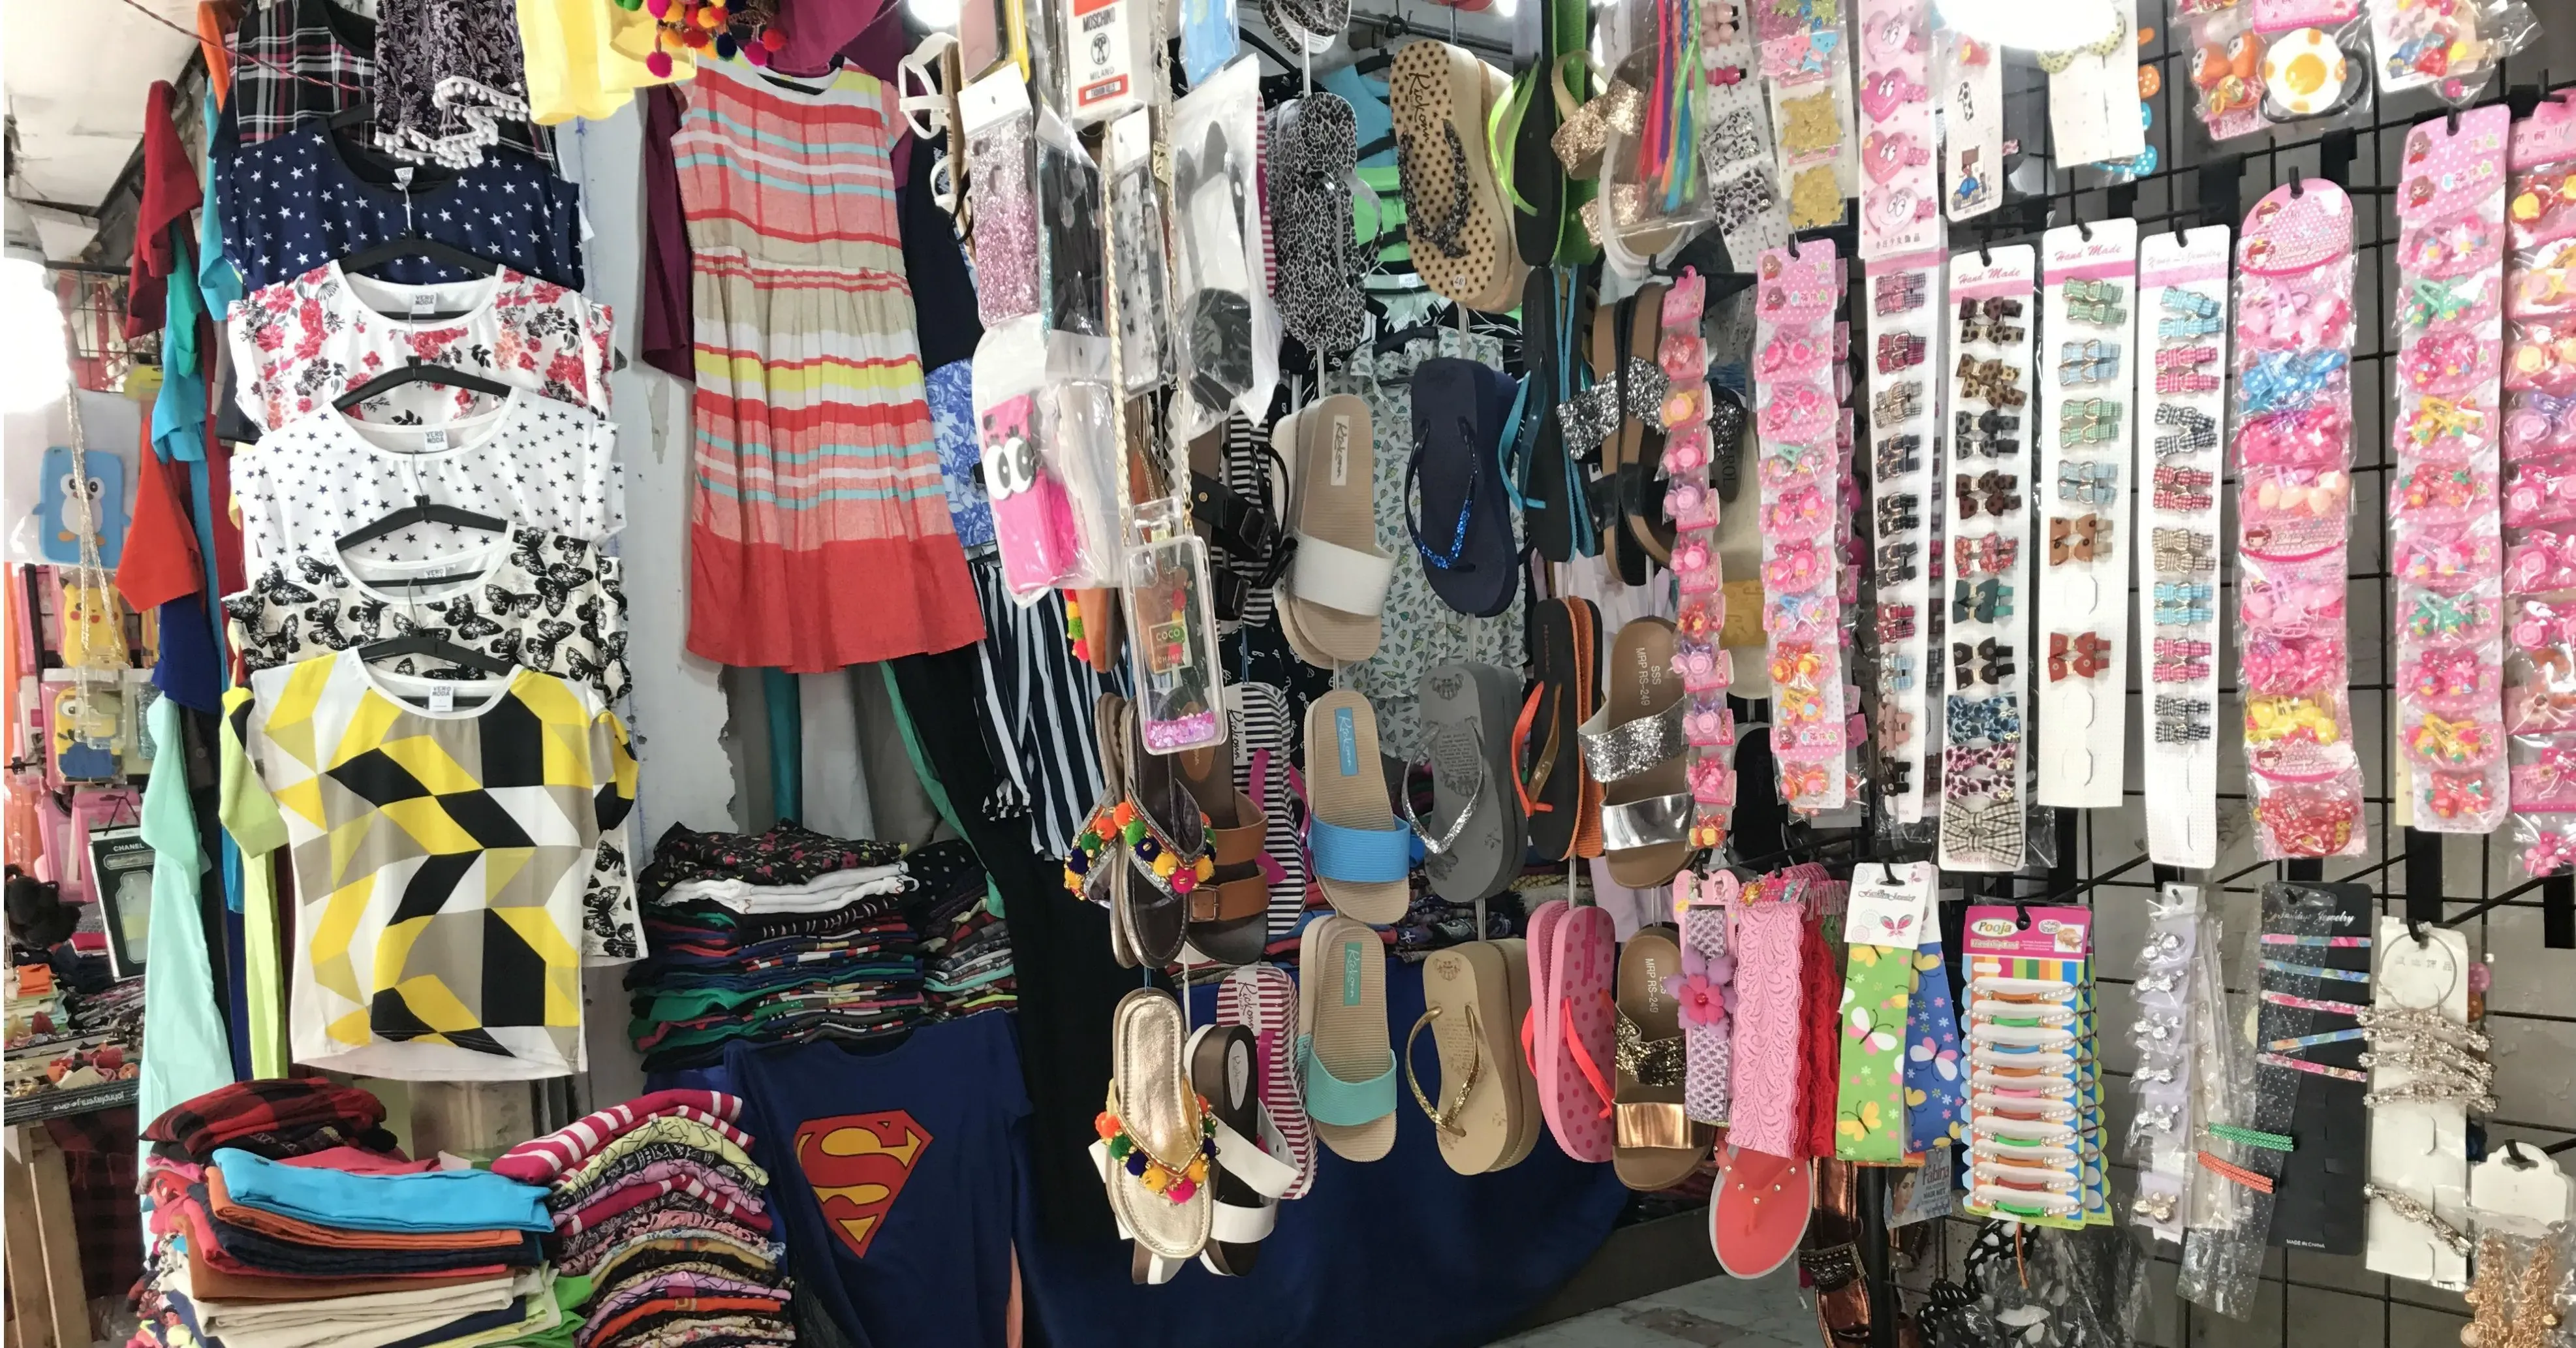 M Block Market GK1 in India, central_asia | Handbags,Shoes,Accessories,Clothes,Swimwear - Country Helper